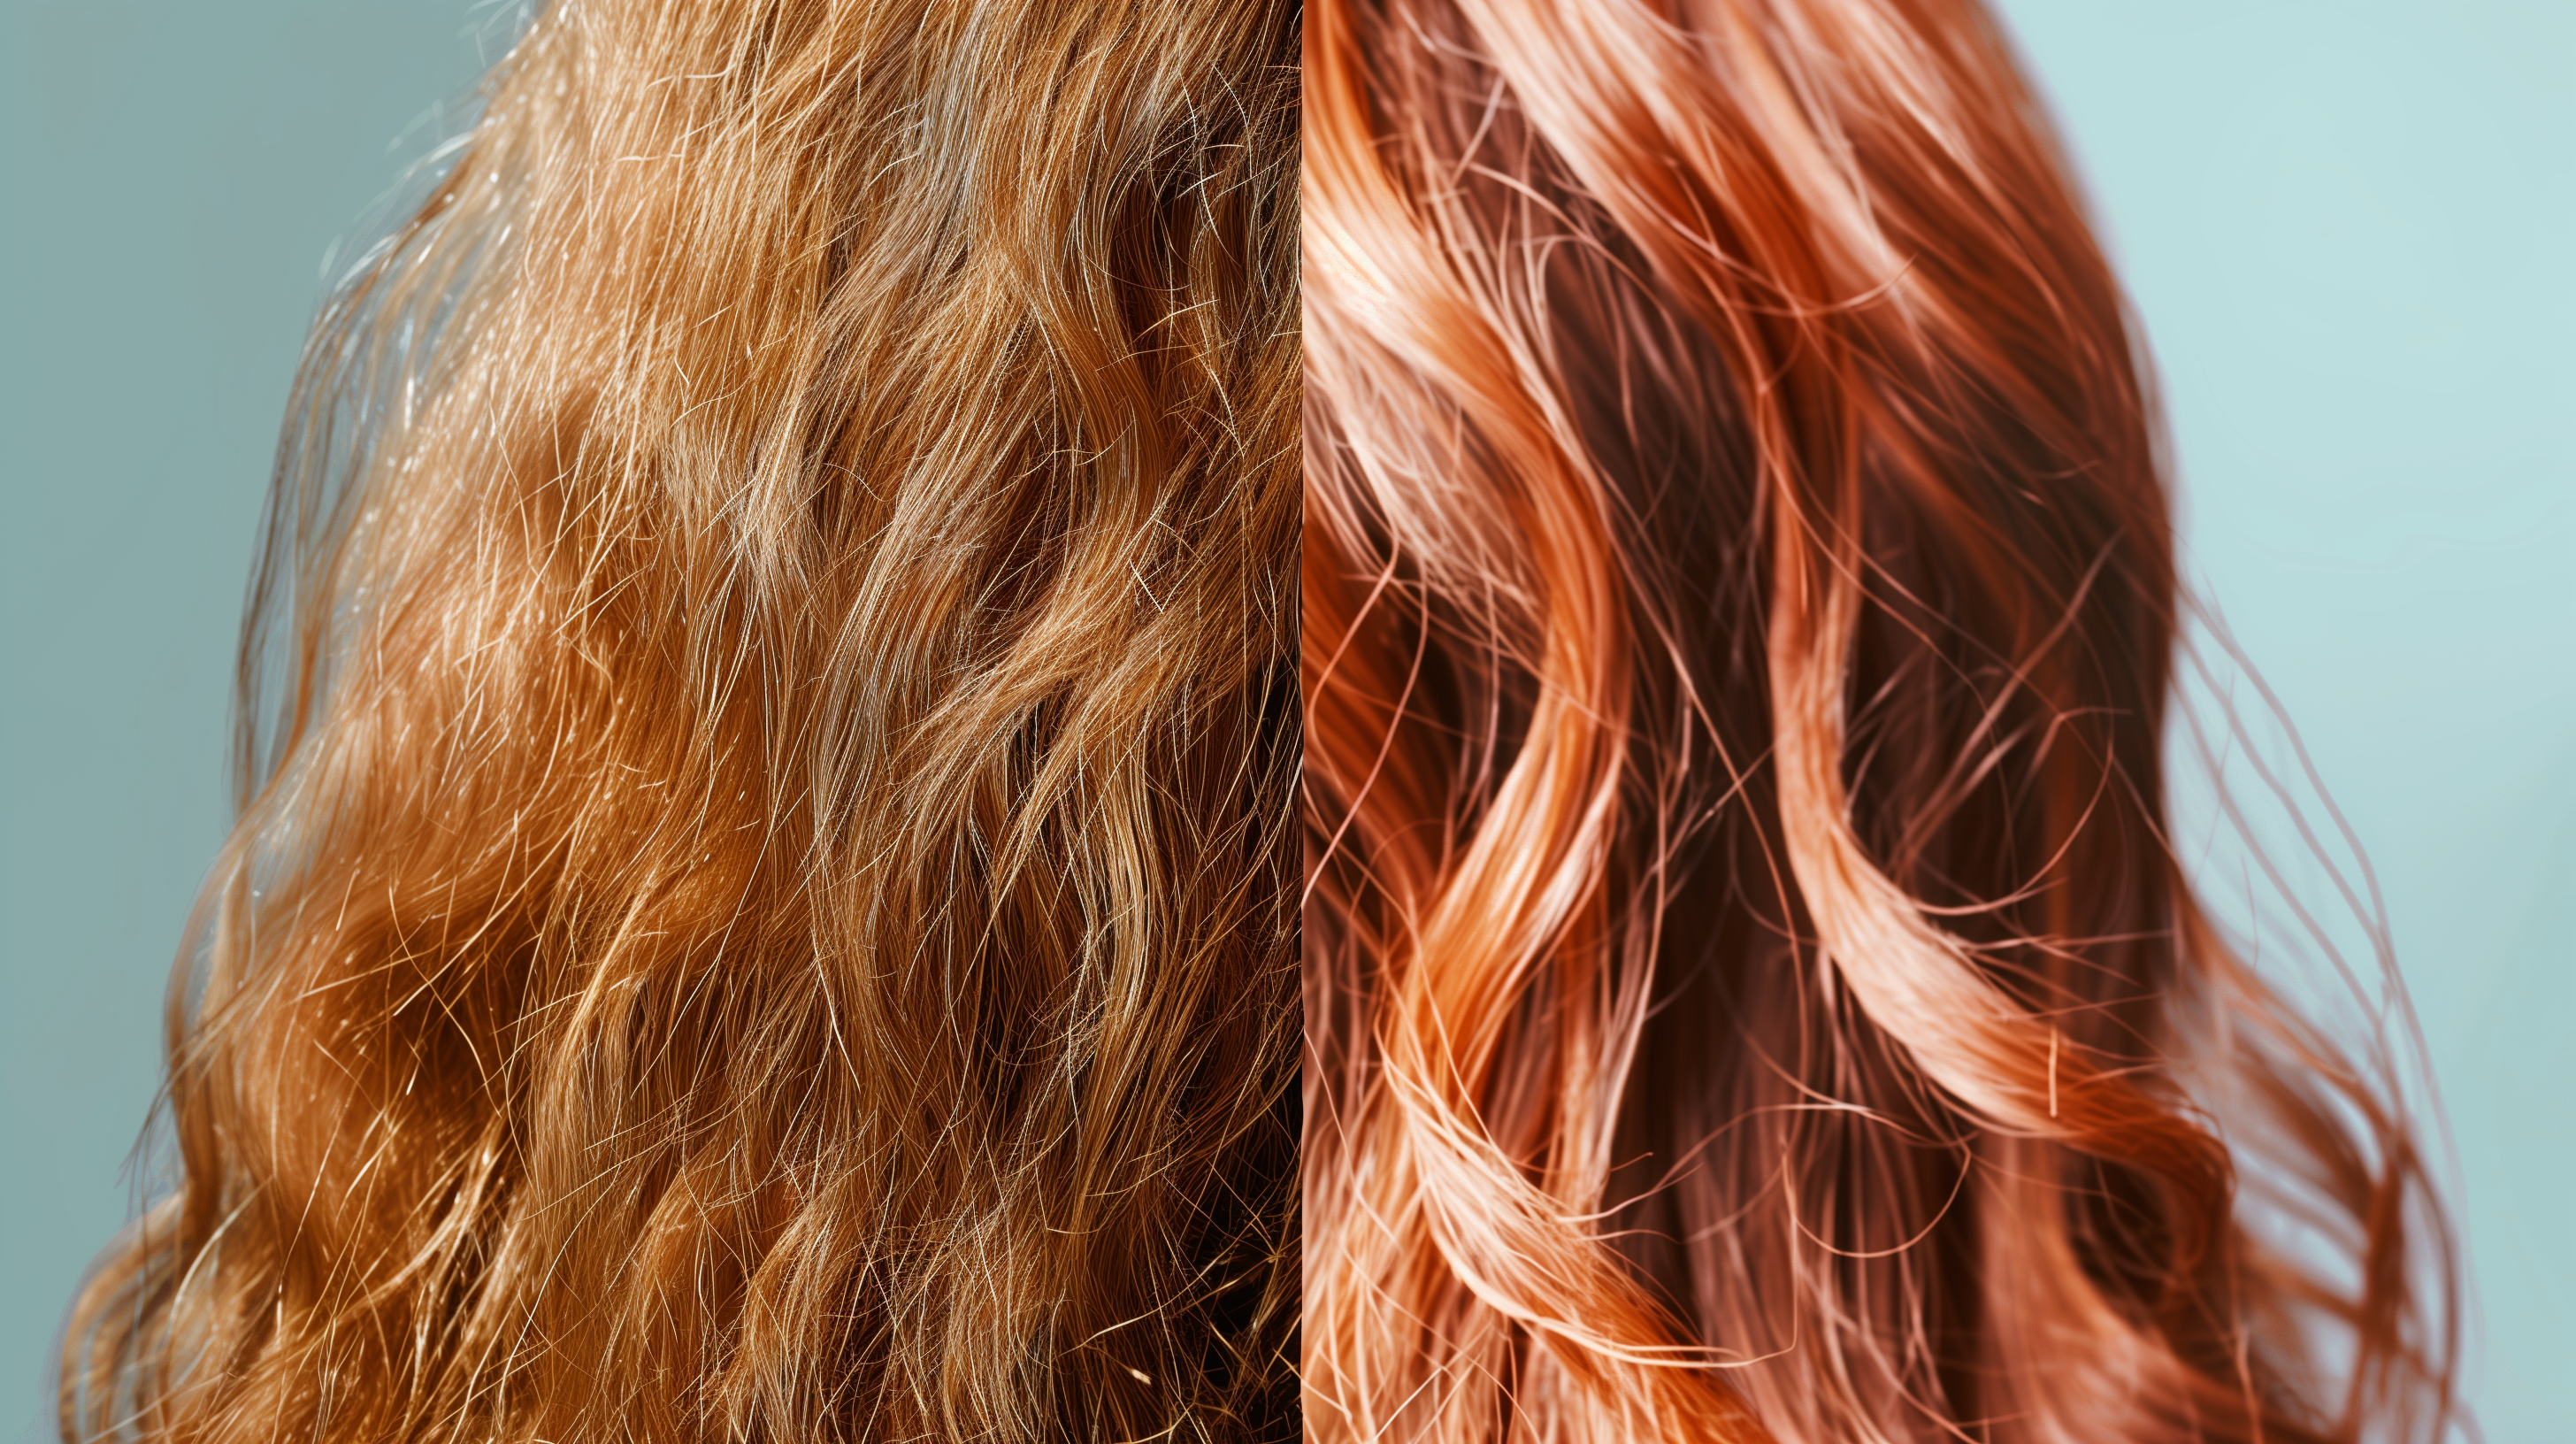 split-screen image: on the left, dull, brittle hair; on the right, luscious, shiny locks. Highlight the contrast with a clear, vibrant distinction in hair health and texture